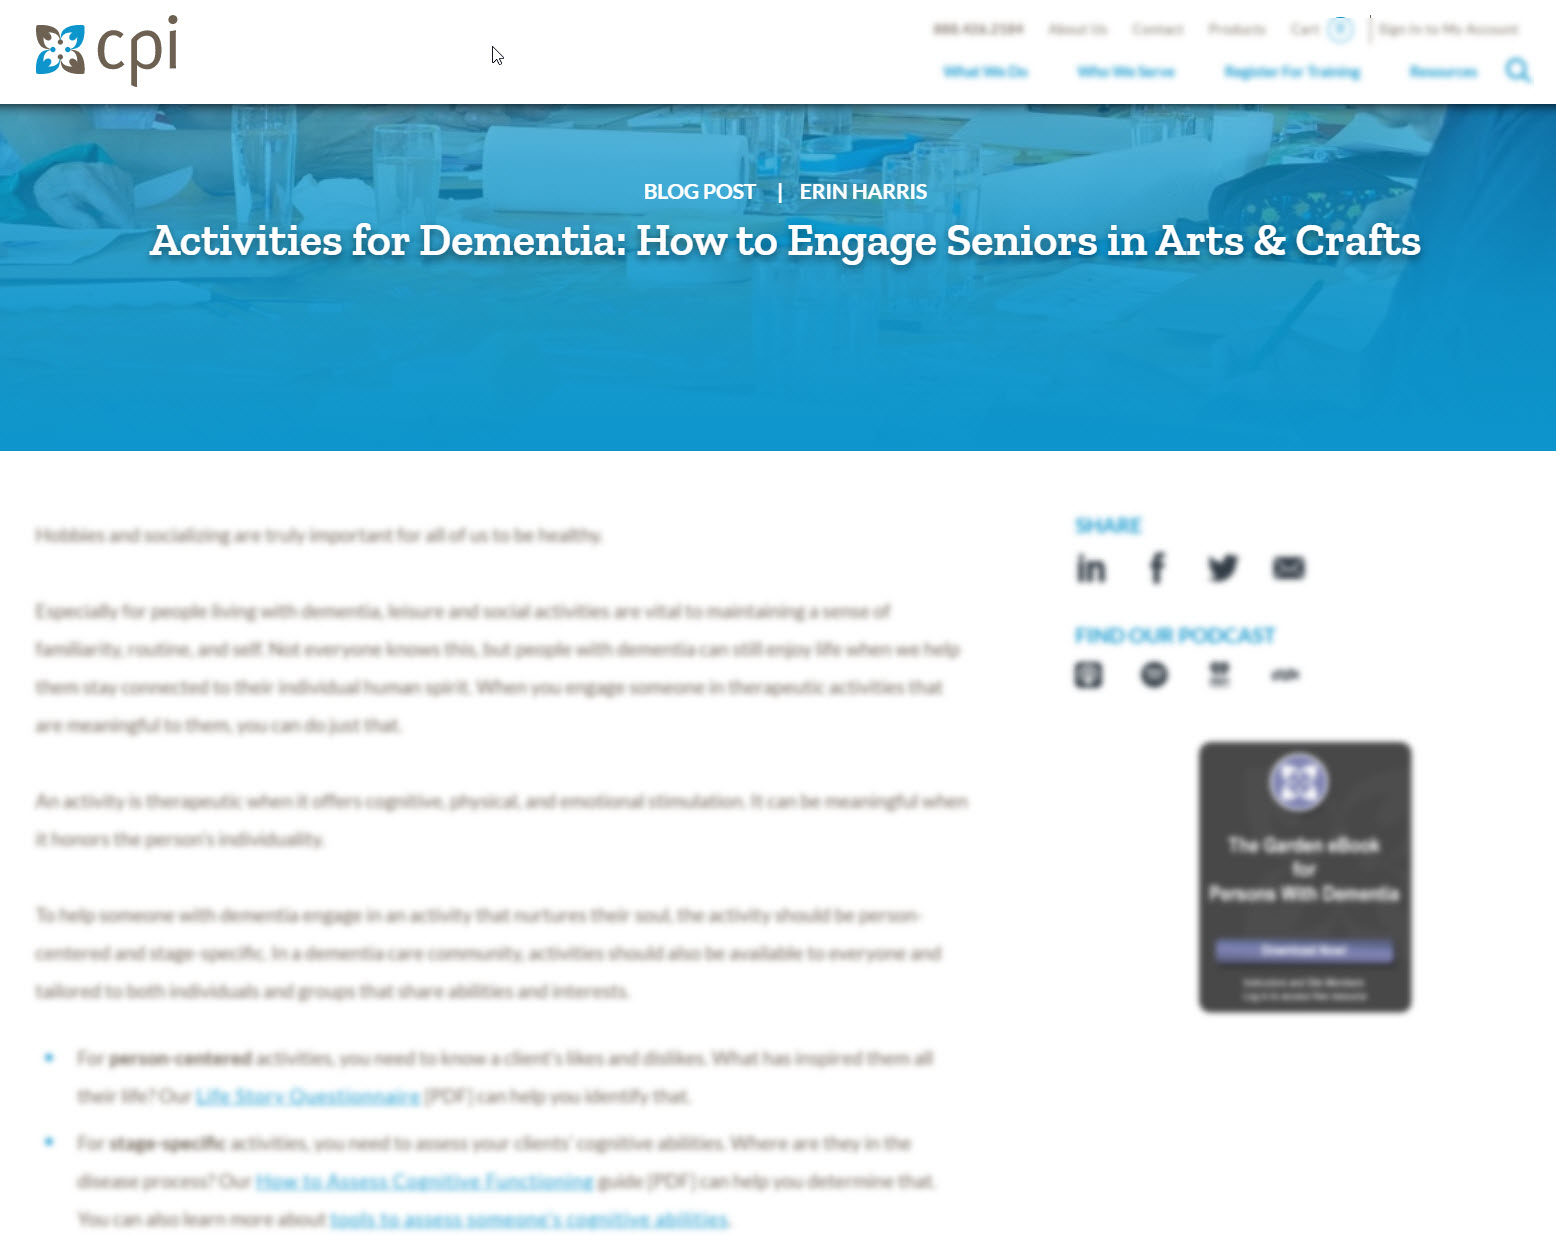 Activities for Dementia: How to Engage Seniors in Arts & Crafts